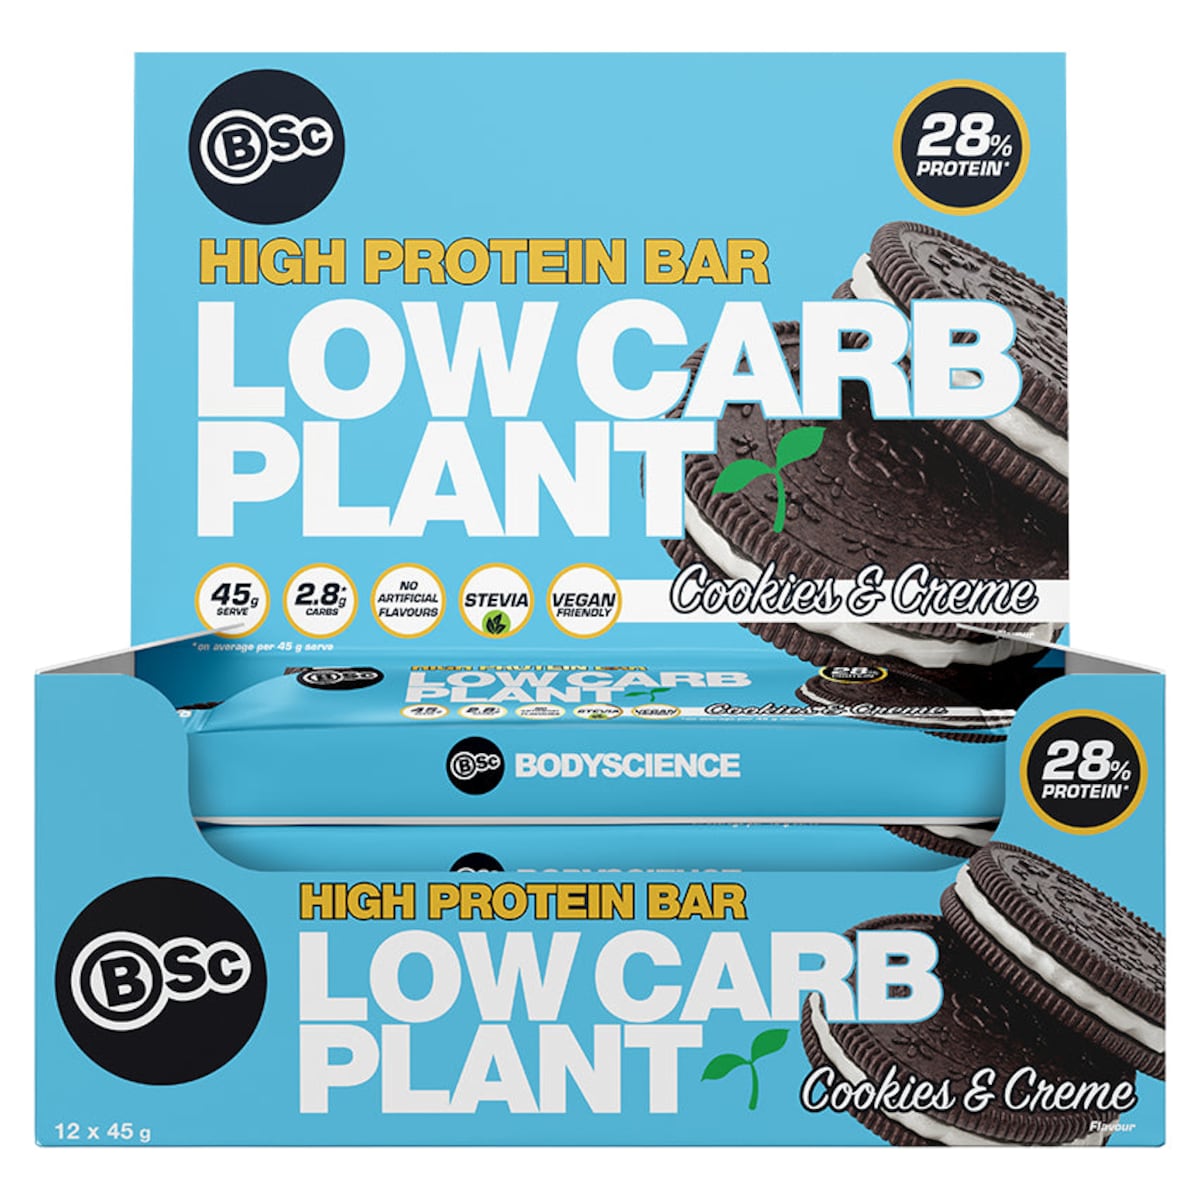 BSc Body Science High Protein Low Carb Plant Bar Cookies & Creme 12